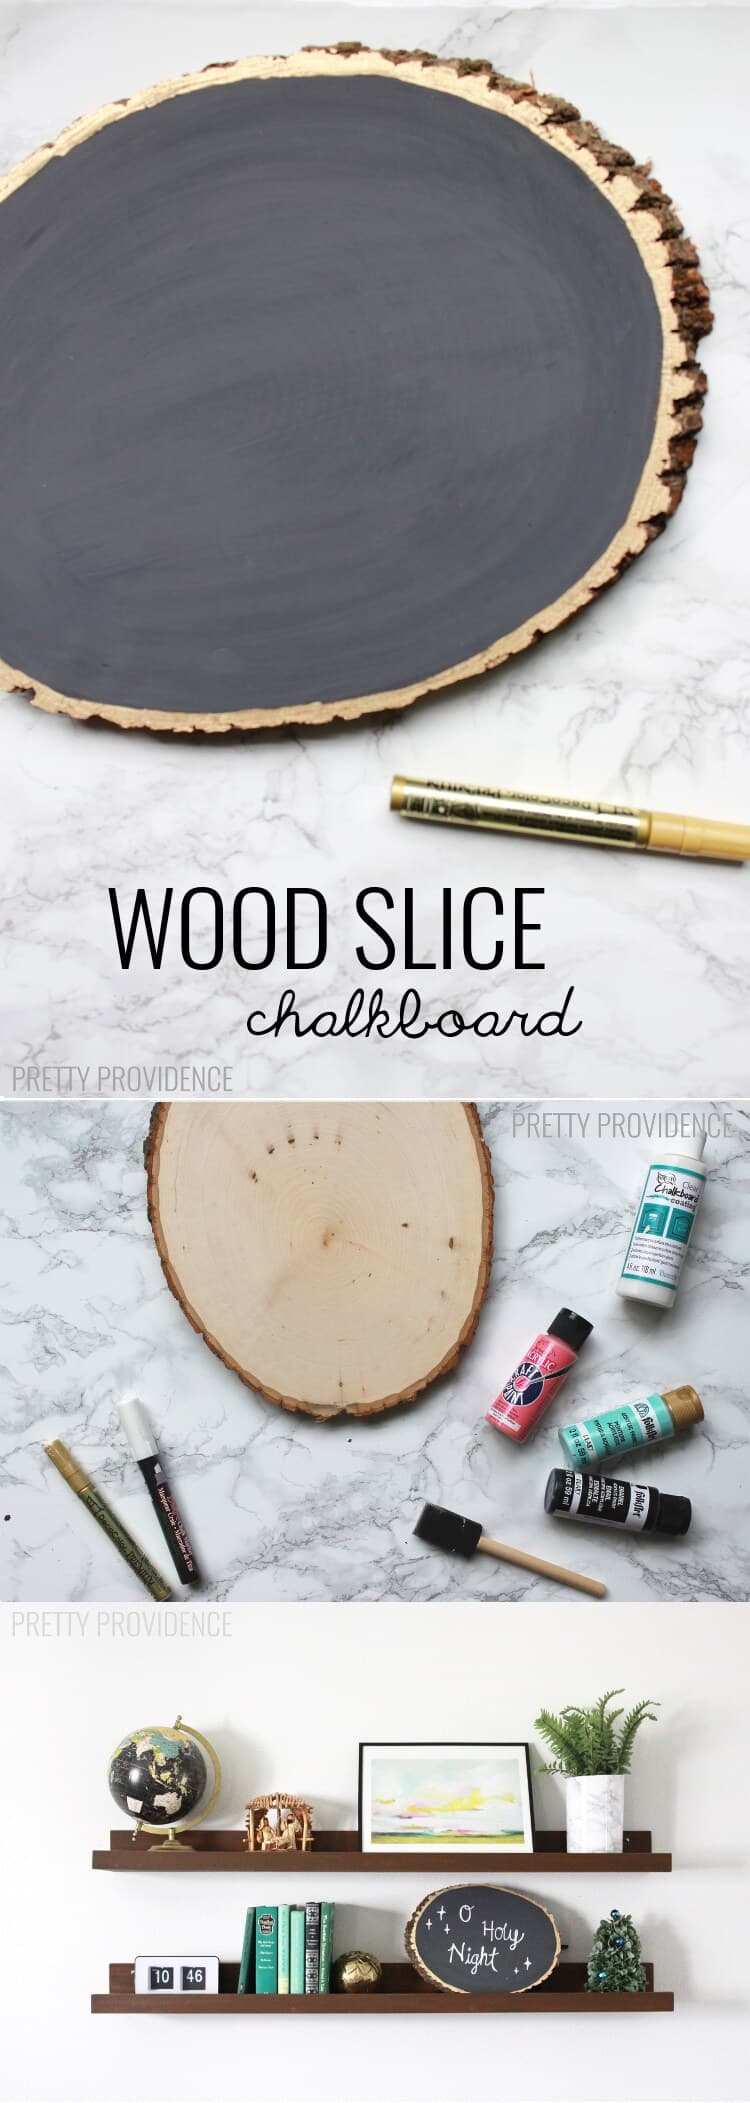 DIY wood slice chalkboard - love this! I change it up for holidays and birthdays, it's so fun!